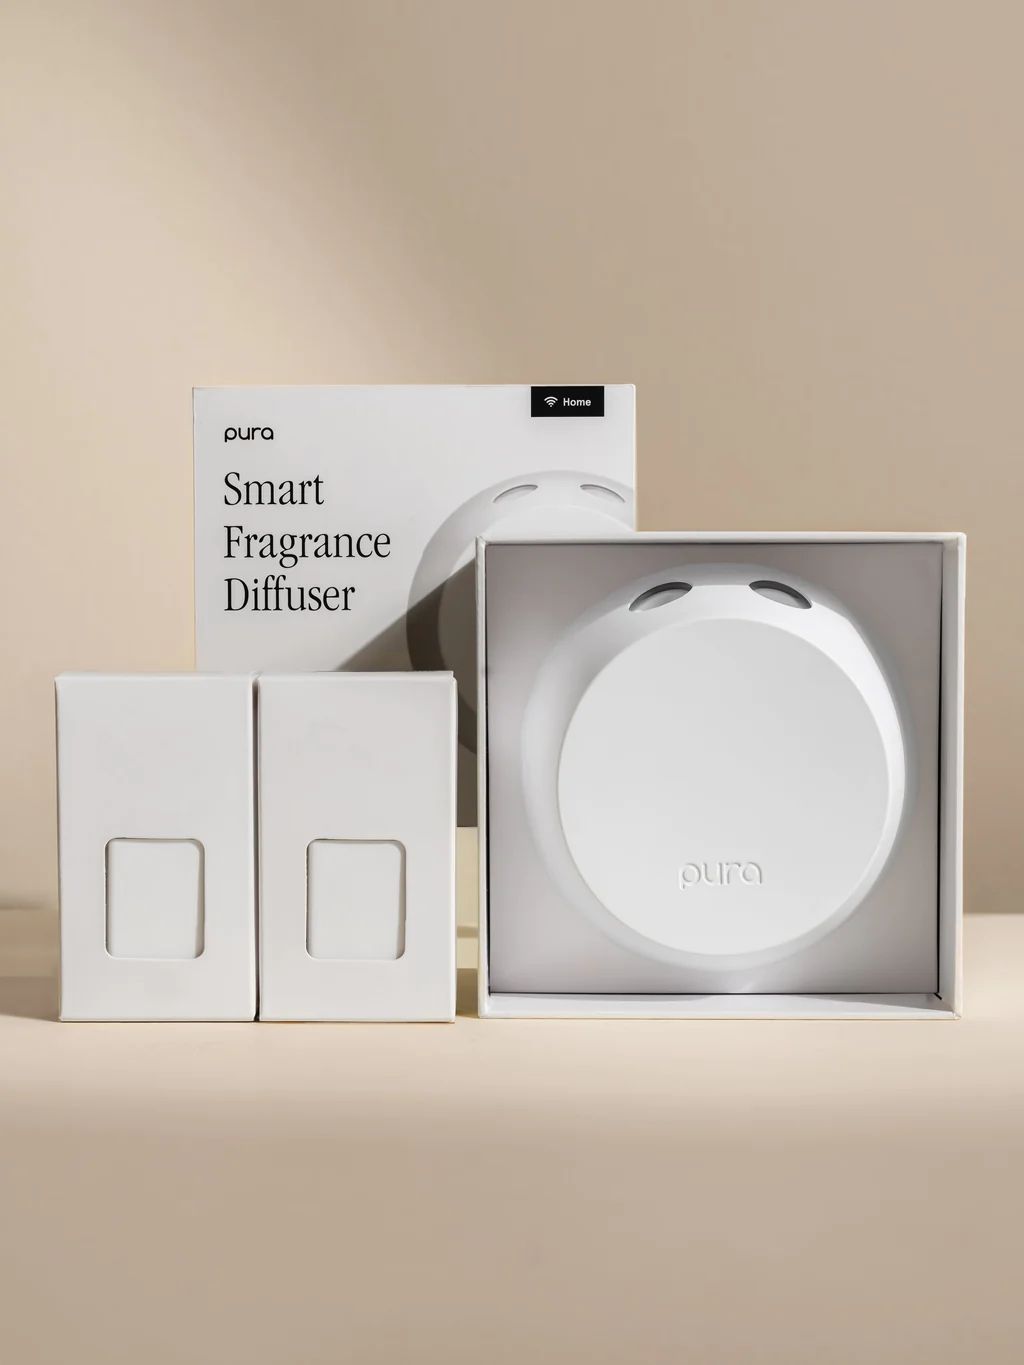 Subscribe to NEST New York's fall scents—Pumpkin Chai, Autumn Plum, Velvet Pear—and more.

  ... | Pura